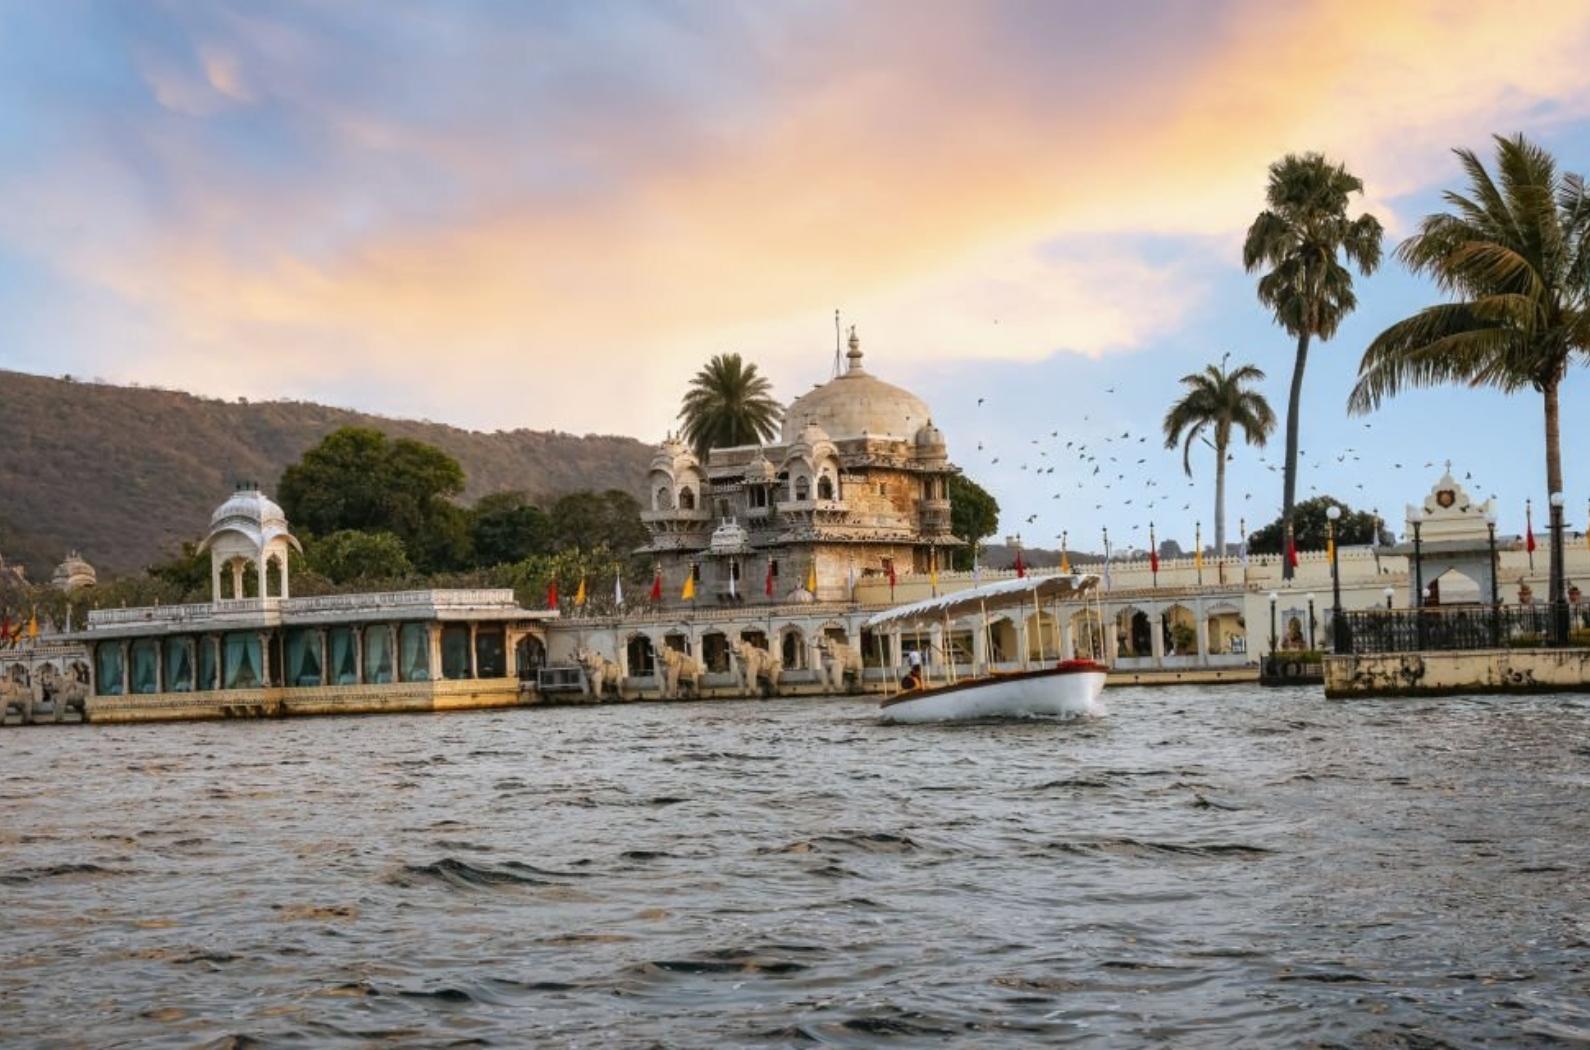 Jagmandir an ancient palace built in the year 1628 on an island in the Lake Pichola at Udaipur, Rajasthan